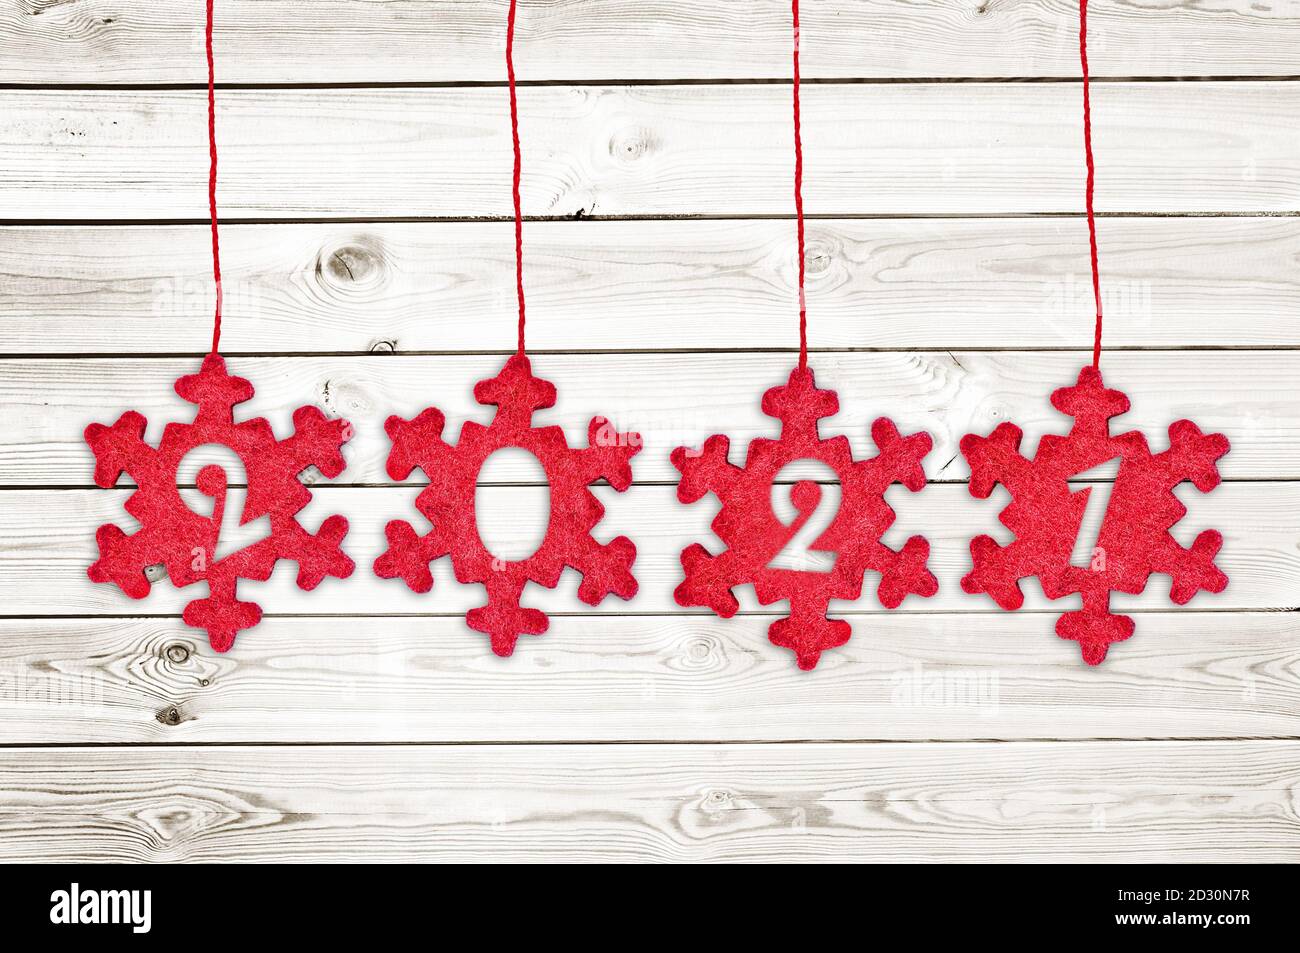 2021 cut in red fabric christmas ornaments hanging on white planks background Stock Photo